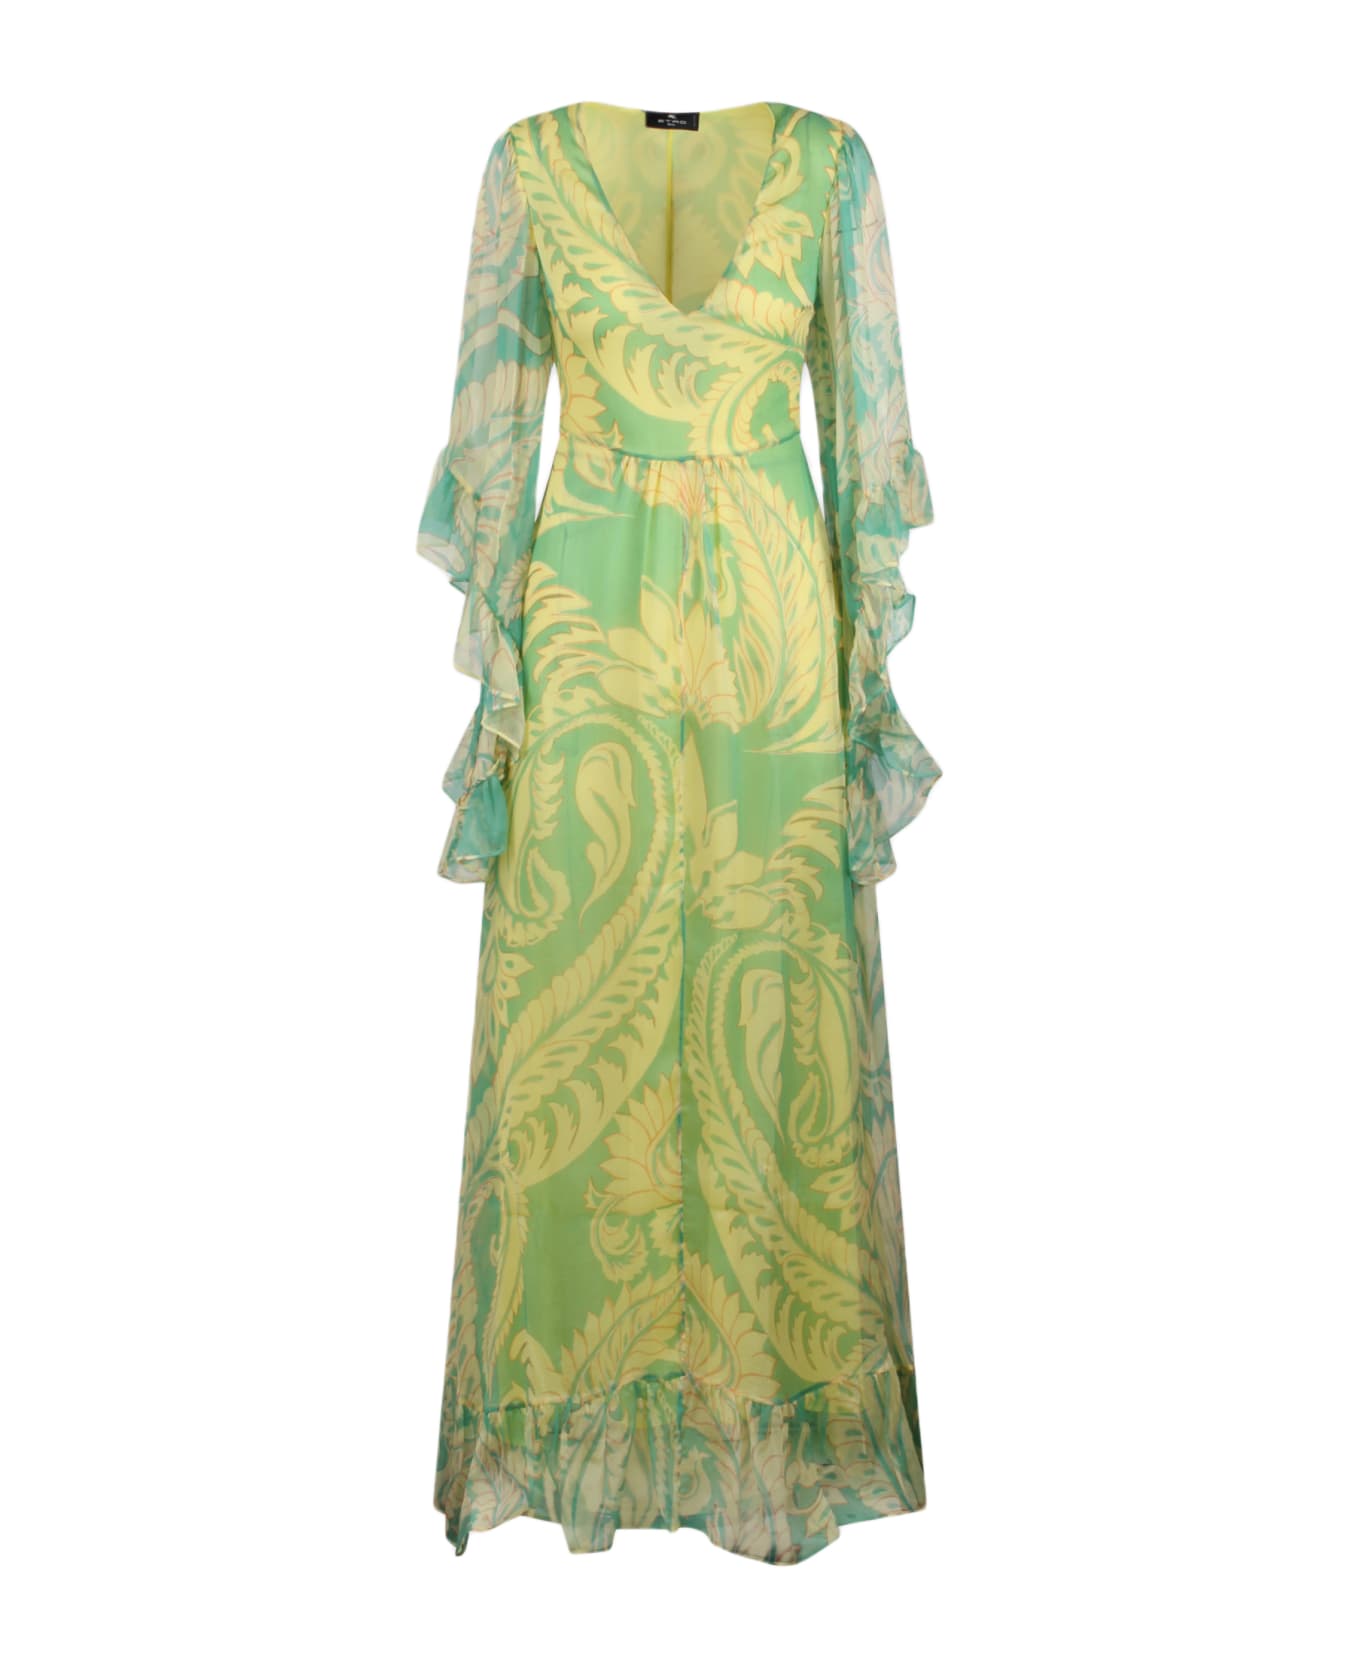 Etro Printed Tulle Dress - Green